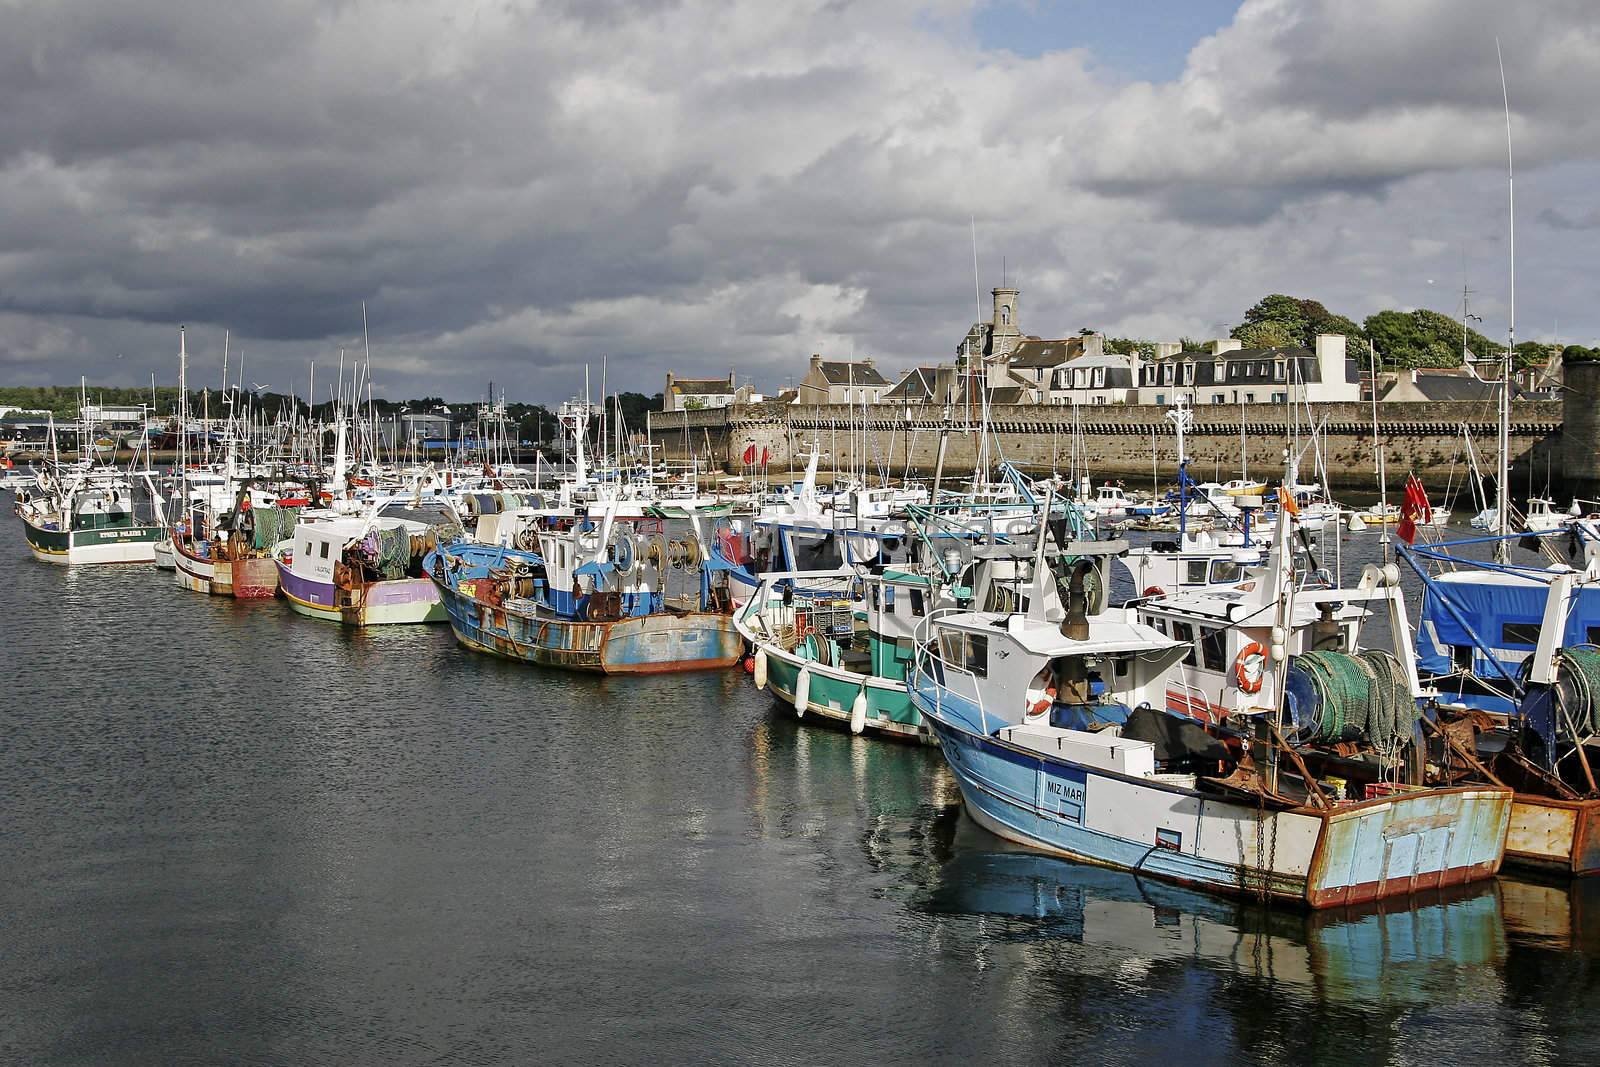 Port near Concarneau, Brittany by Natureandmore